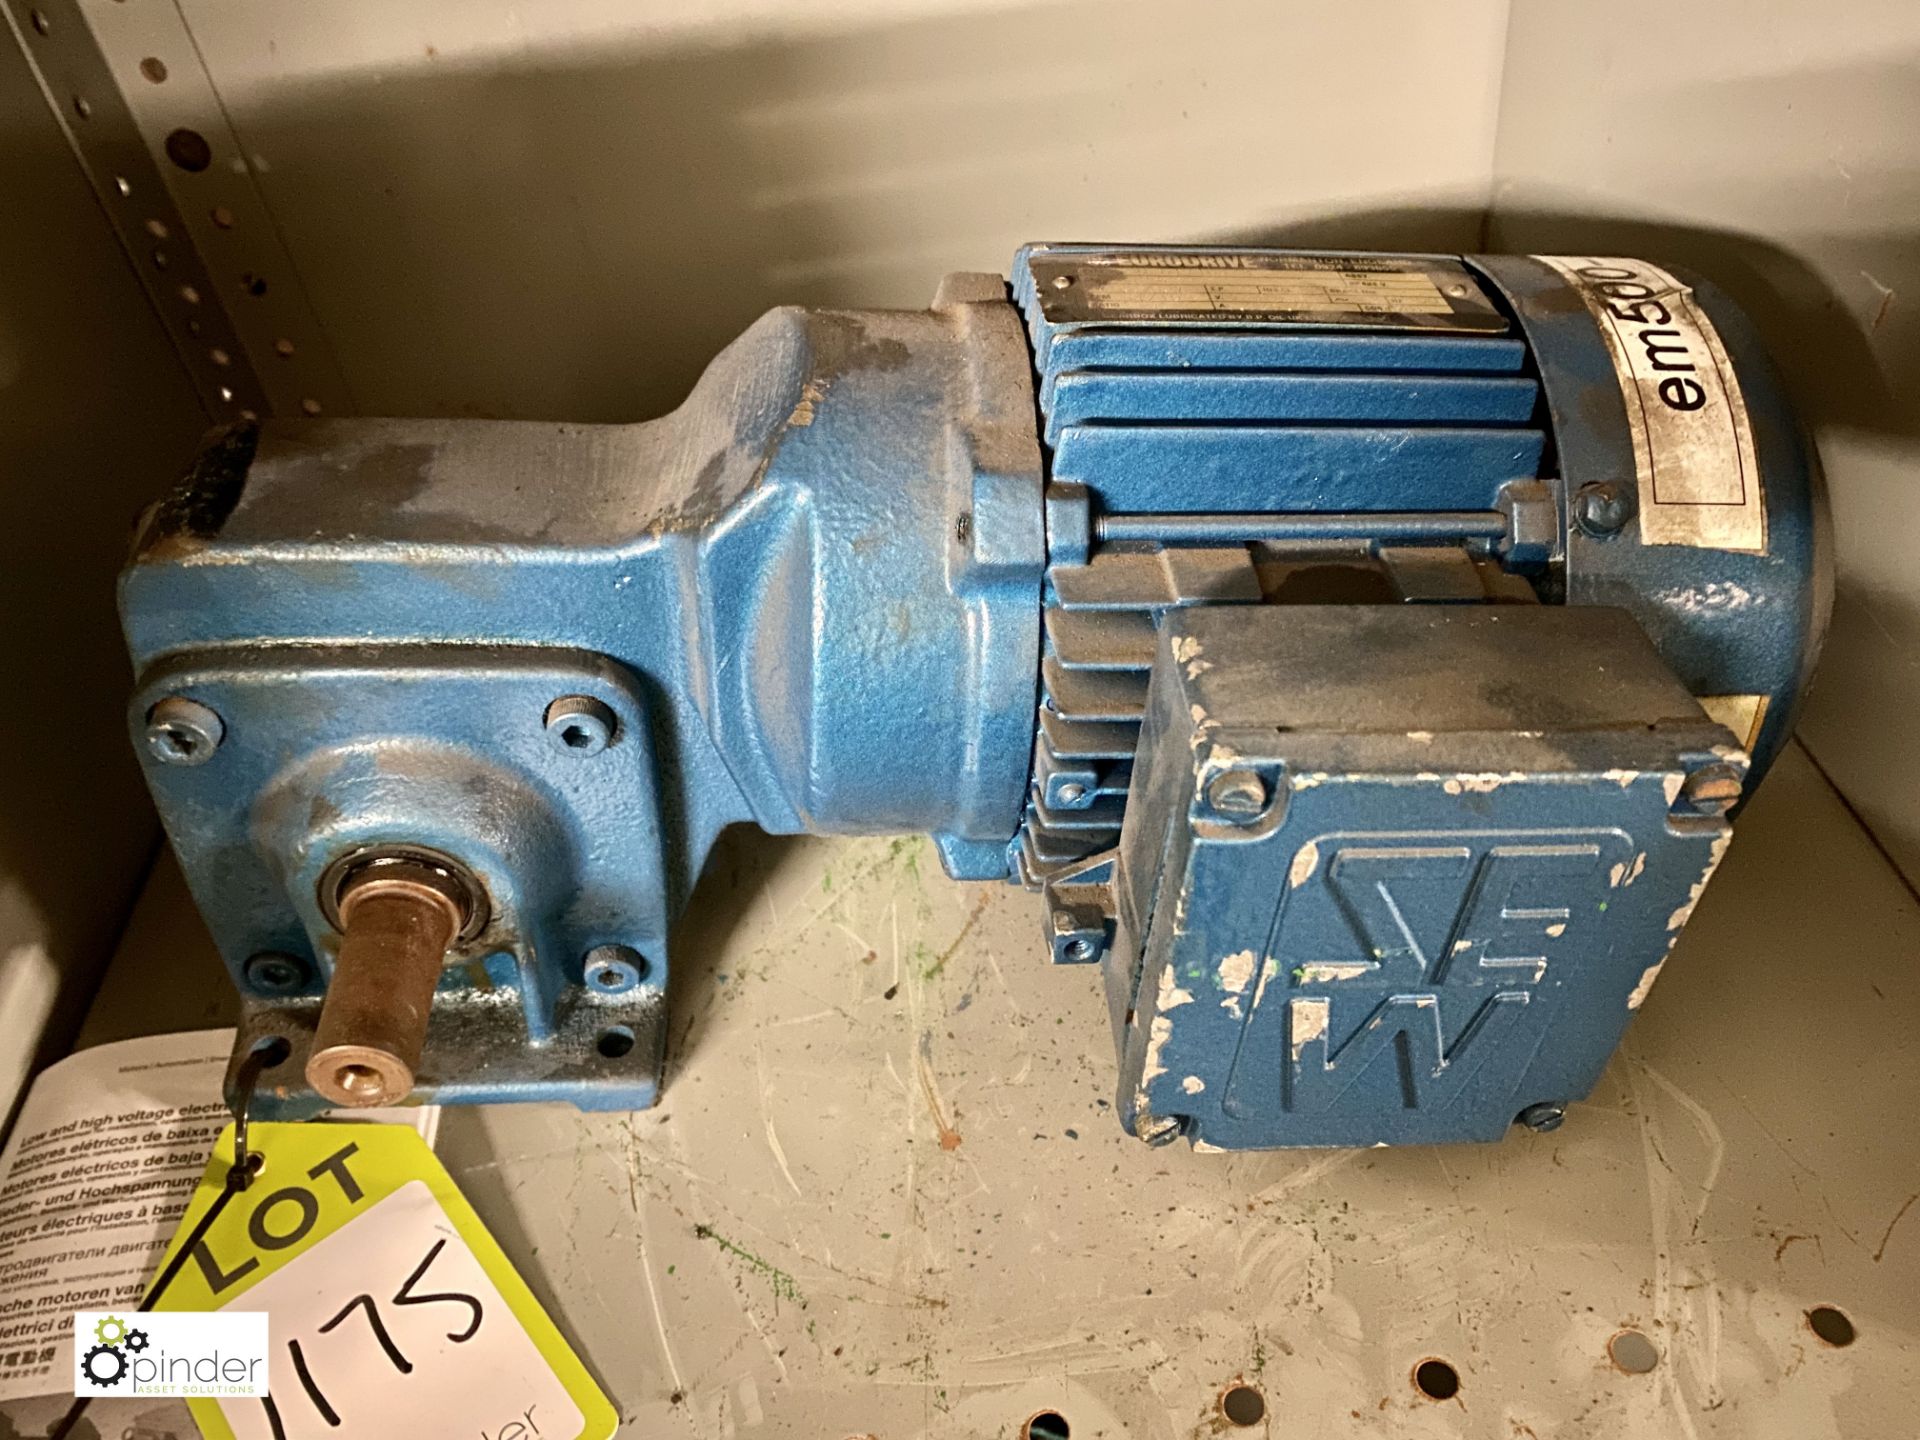 SEW Eurodrive Electric Motor and 90° 0.25kw Gearbox (EM500-0004) (please note there is a lift out